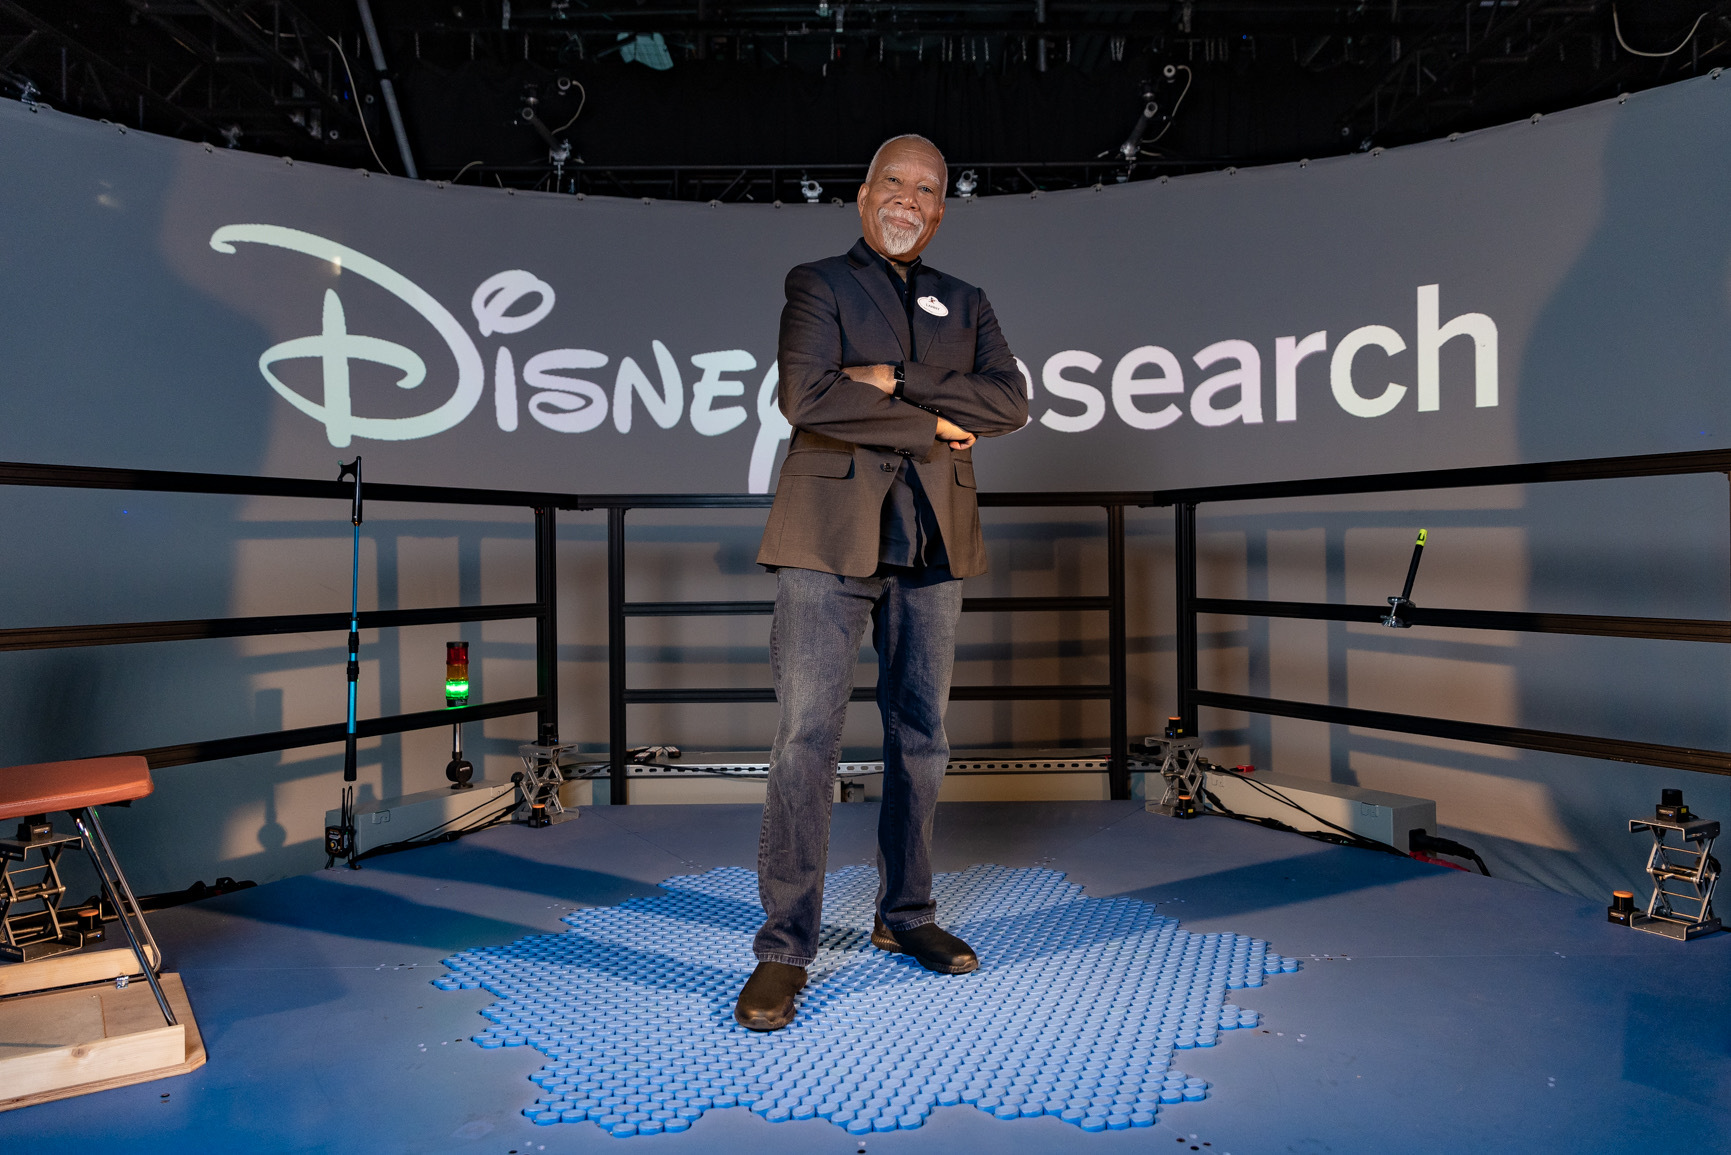 Disney Imagineer Introduces HoloTile Floor, Redefining Virtual Reality and Interactive Experiences